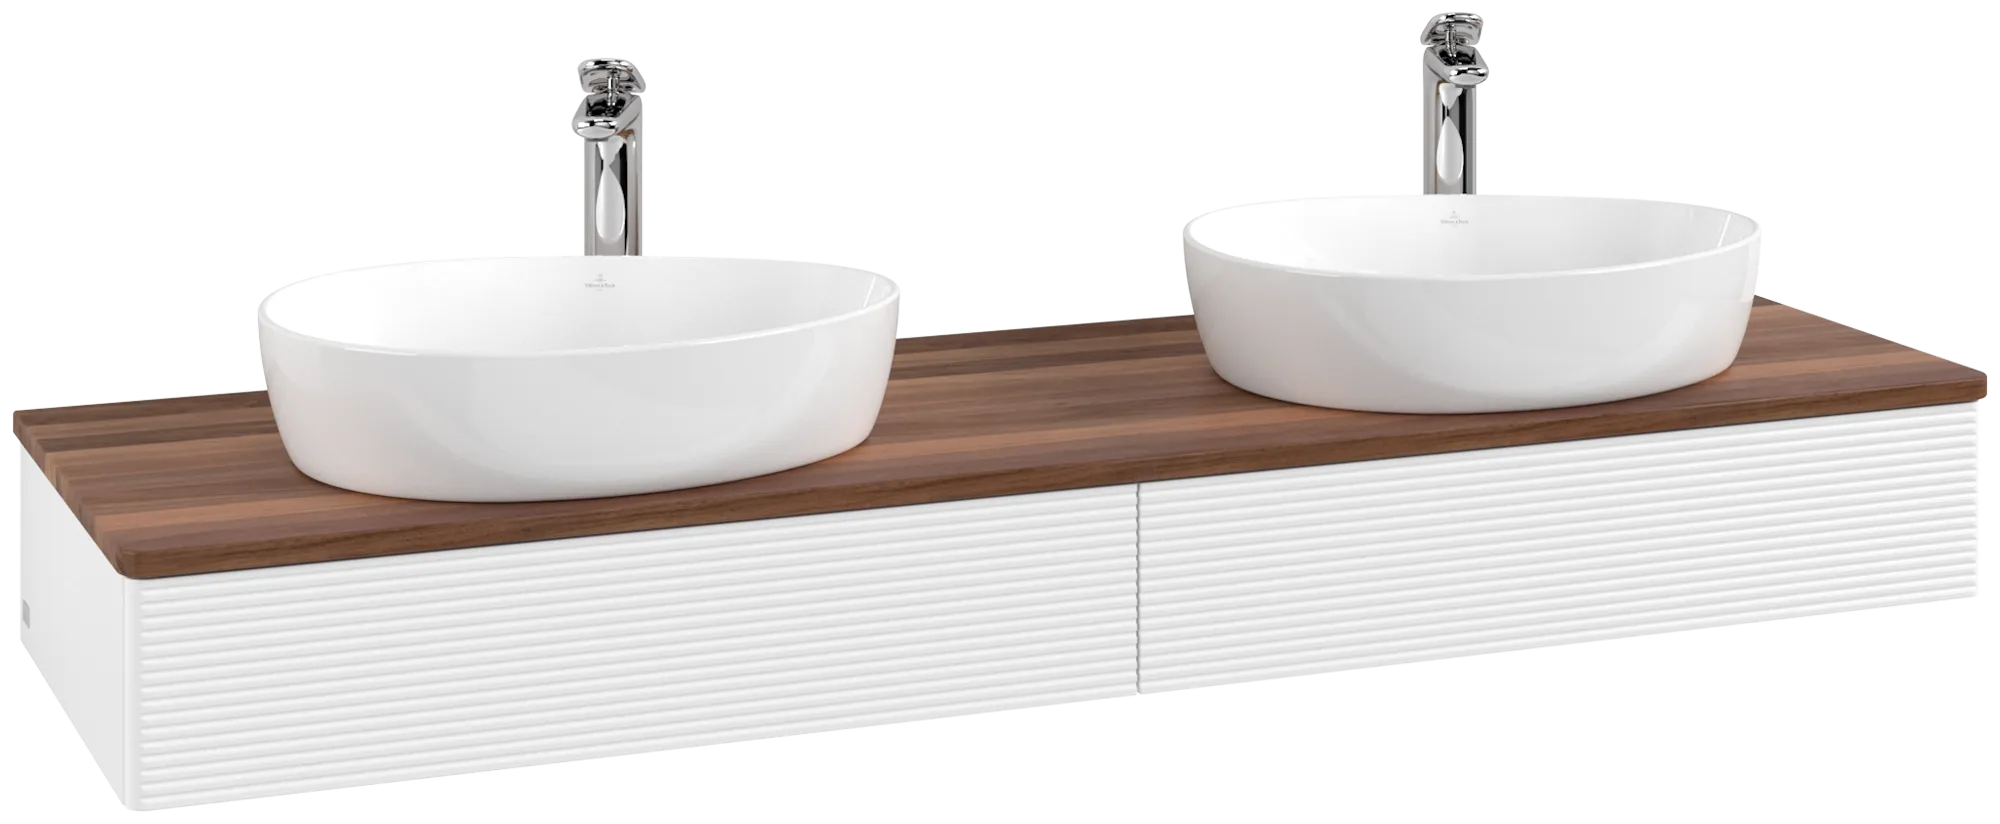 VILLEROY BOCH Antao Vanity unit, 2 pull-out compartments, 1600 x 190 x 500 mm, Front with grain texture, White Matt Lacquer / Warm Walnut #K17152MT resmi